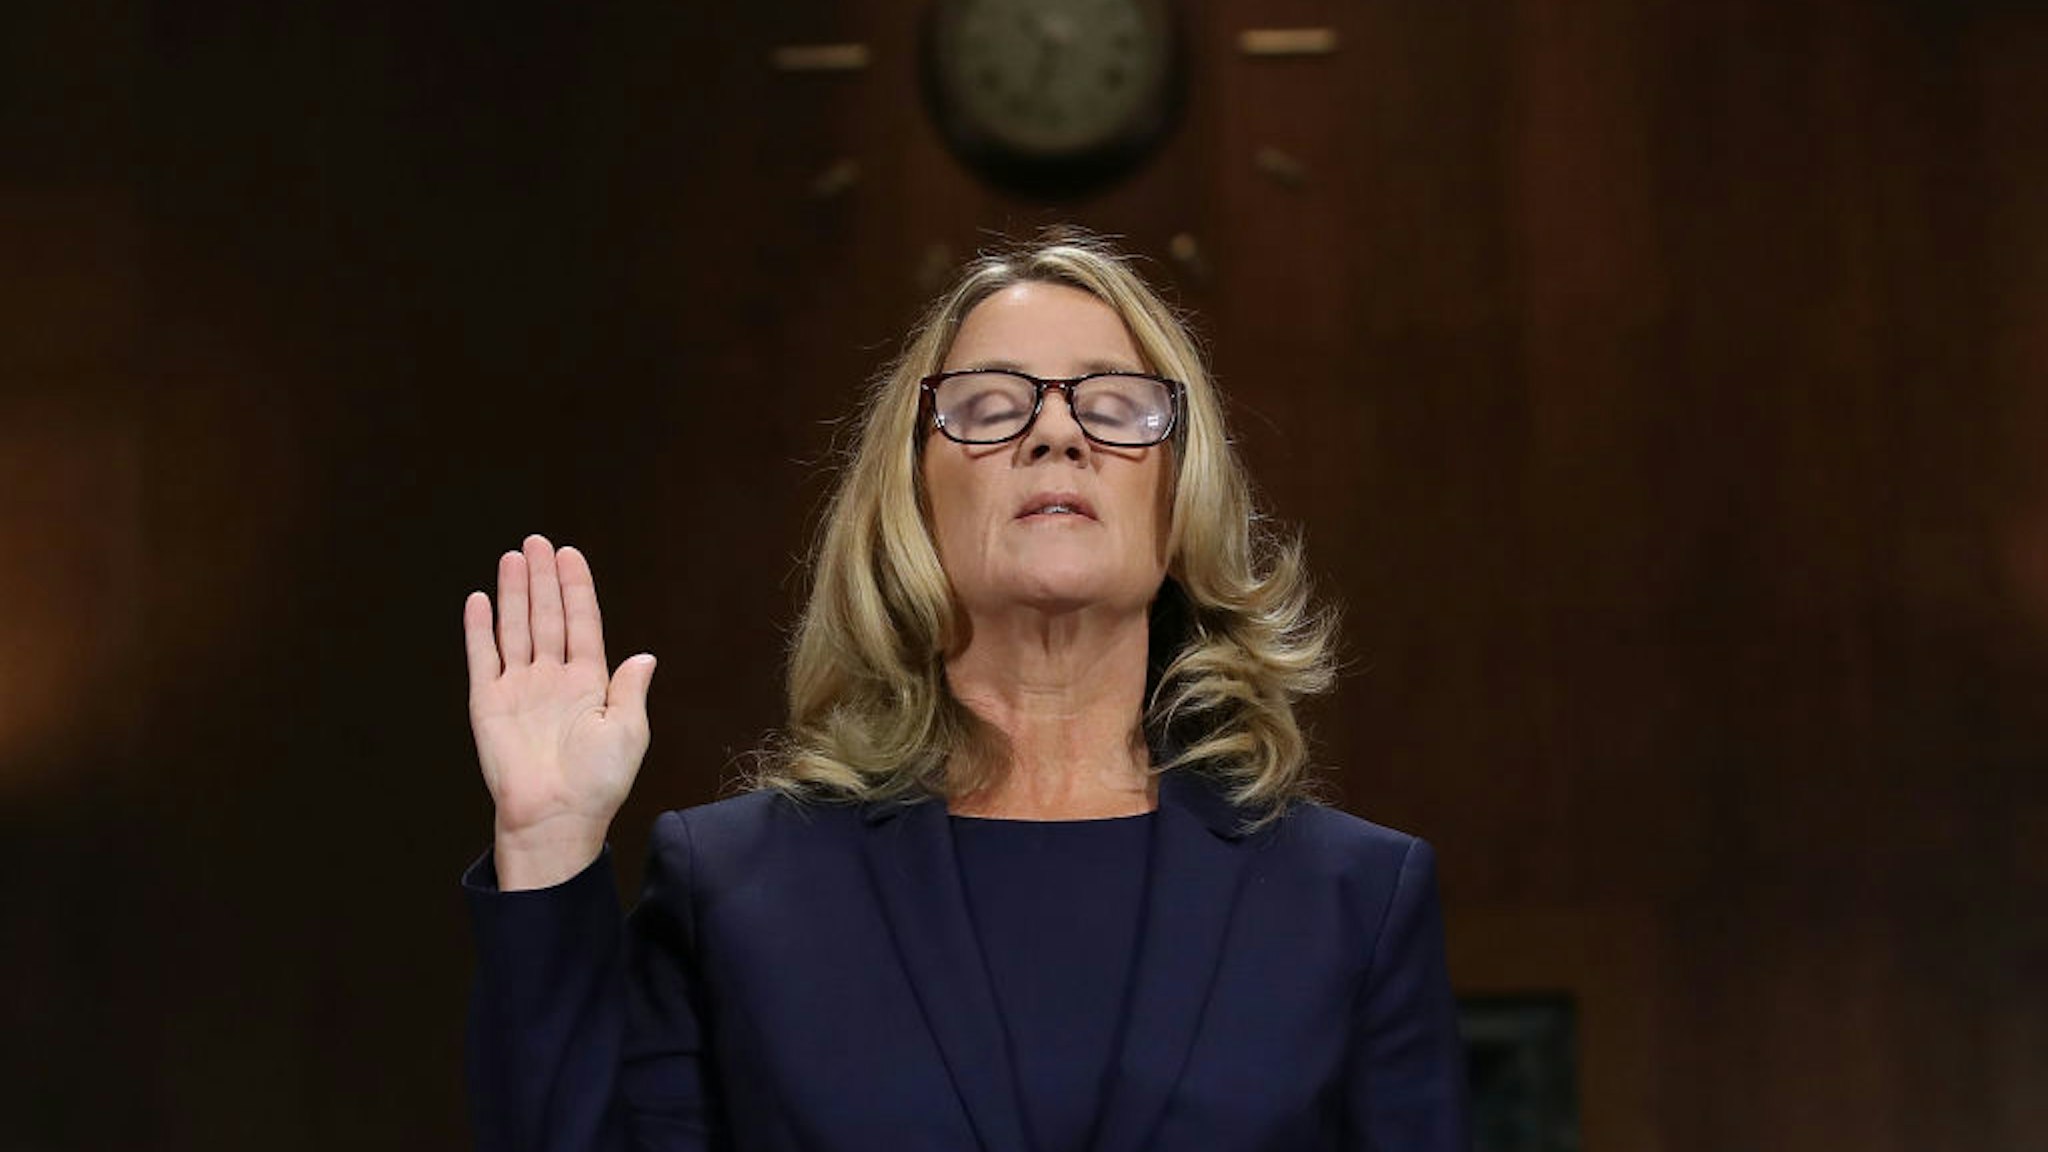 WASHINGTON, DC - SEPTEMBER 27: Christine Blasey Ford is sworn in before testifying the Senate Judiciary Committee in the Dirksen Senate Office Building on Capitol Hill September 27, 2018 in Washington, DC.